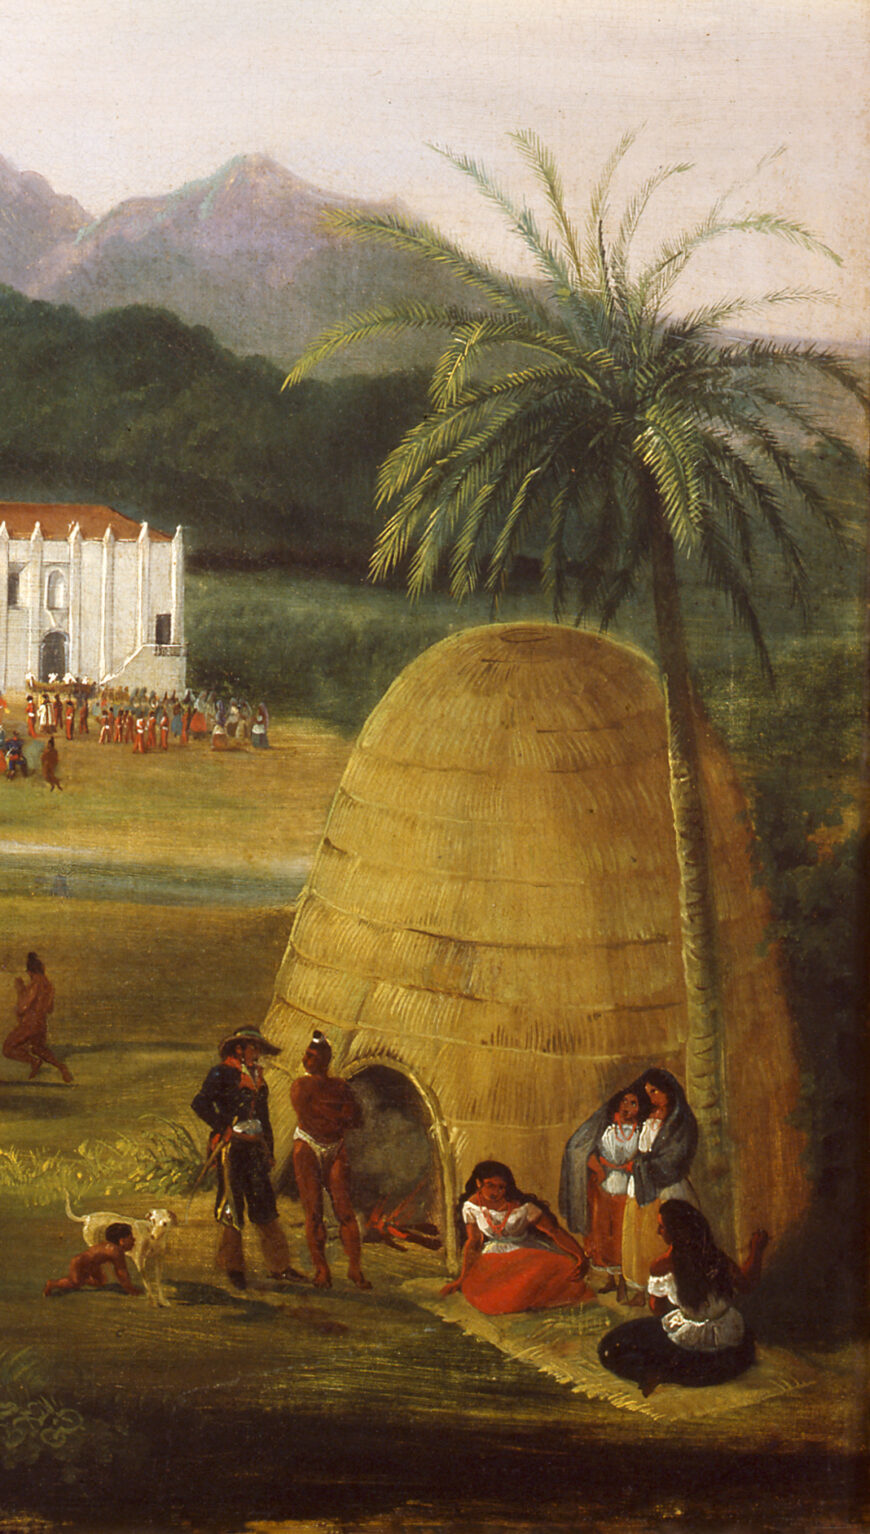 Date palm and kiiy (detail), Ferdinand Deppe, The Mission of San Gabriel, Alta California in May 1832, oil on canvas, 42 3/4 x 33 1/2 inches (collection of Santa Bárbara Mission Archive-Library)